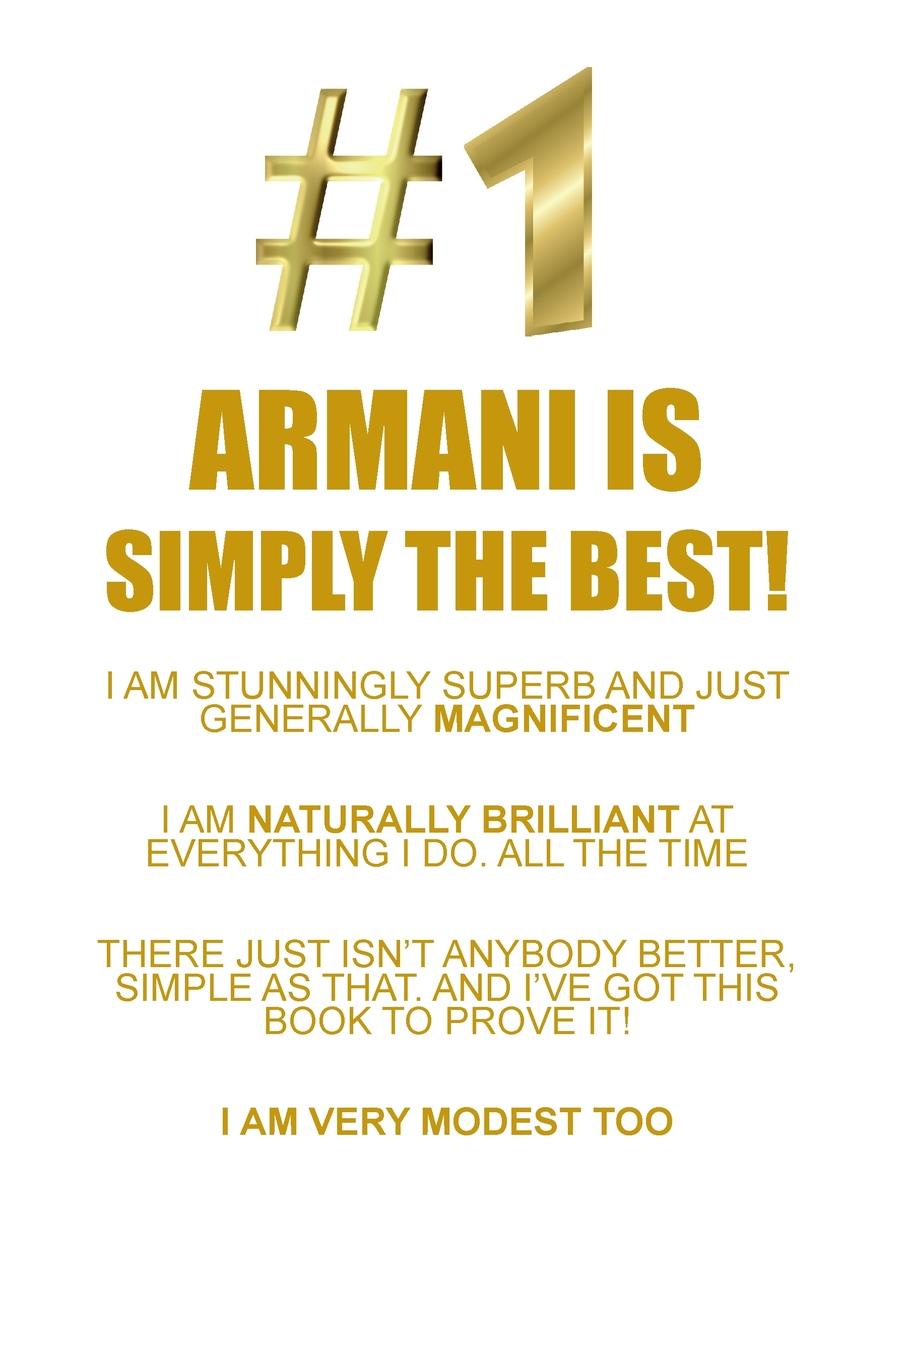 ARMANI IS SIMPLY THE BEST AFFIRMATIONS WORKBOOK Positive Affirmations Workbook Includes. Mentoring Questions, Guidance, Supporting You